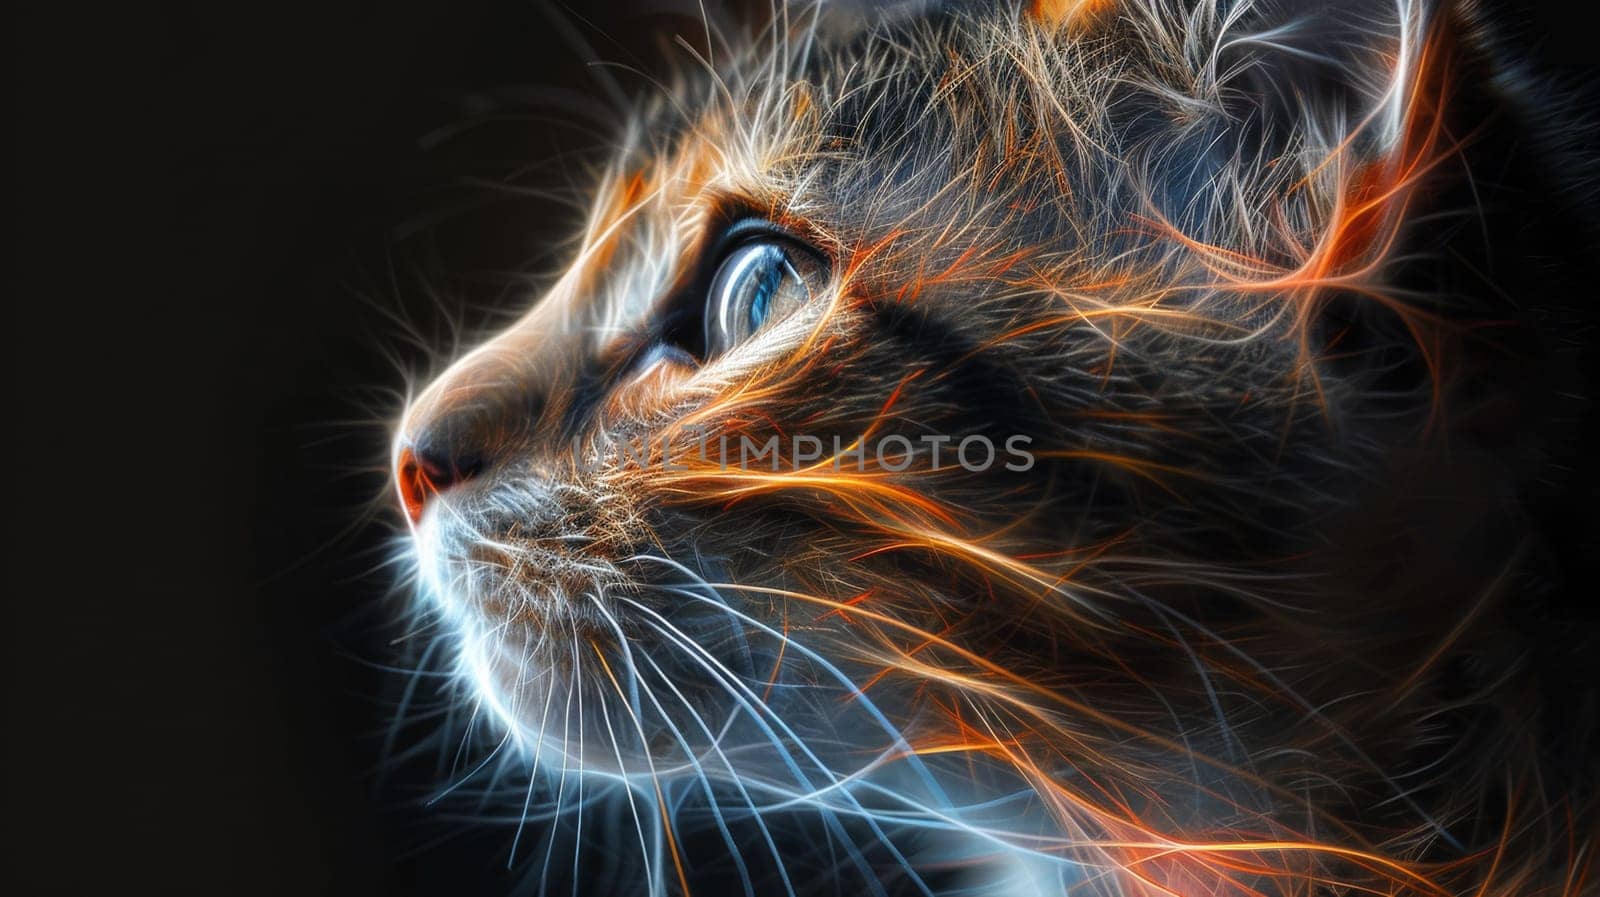 A close up of a cat with glowing eyes and fur